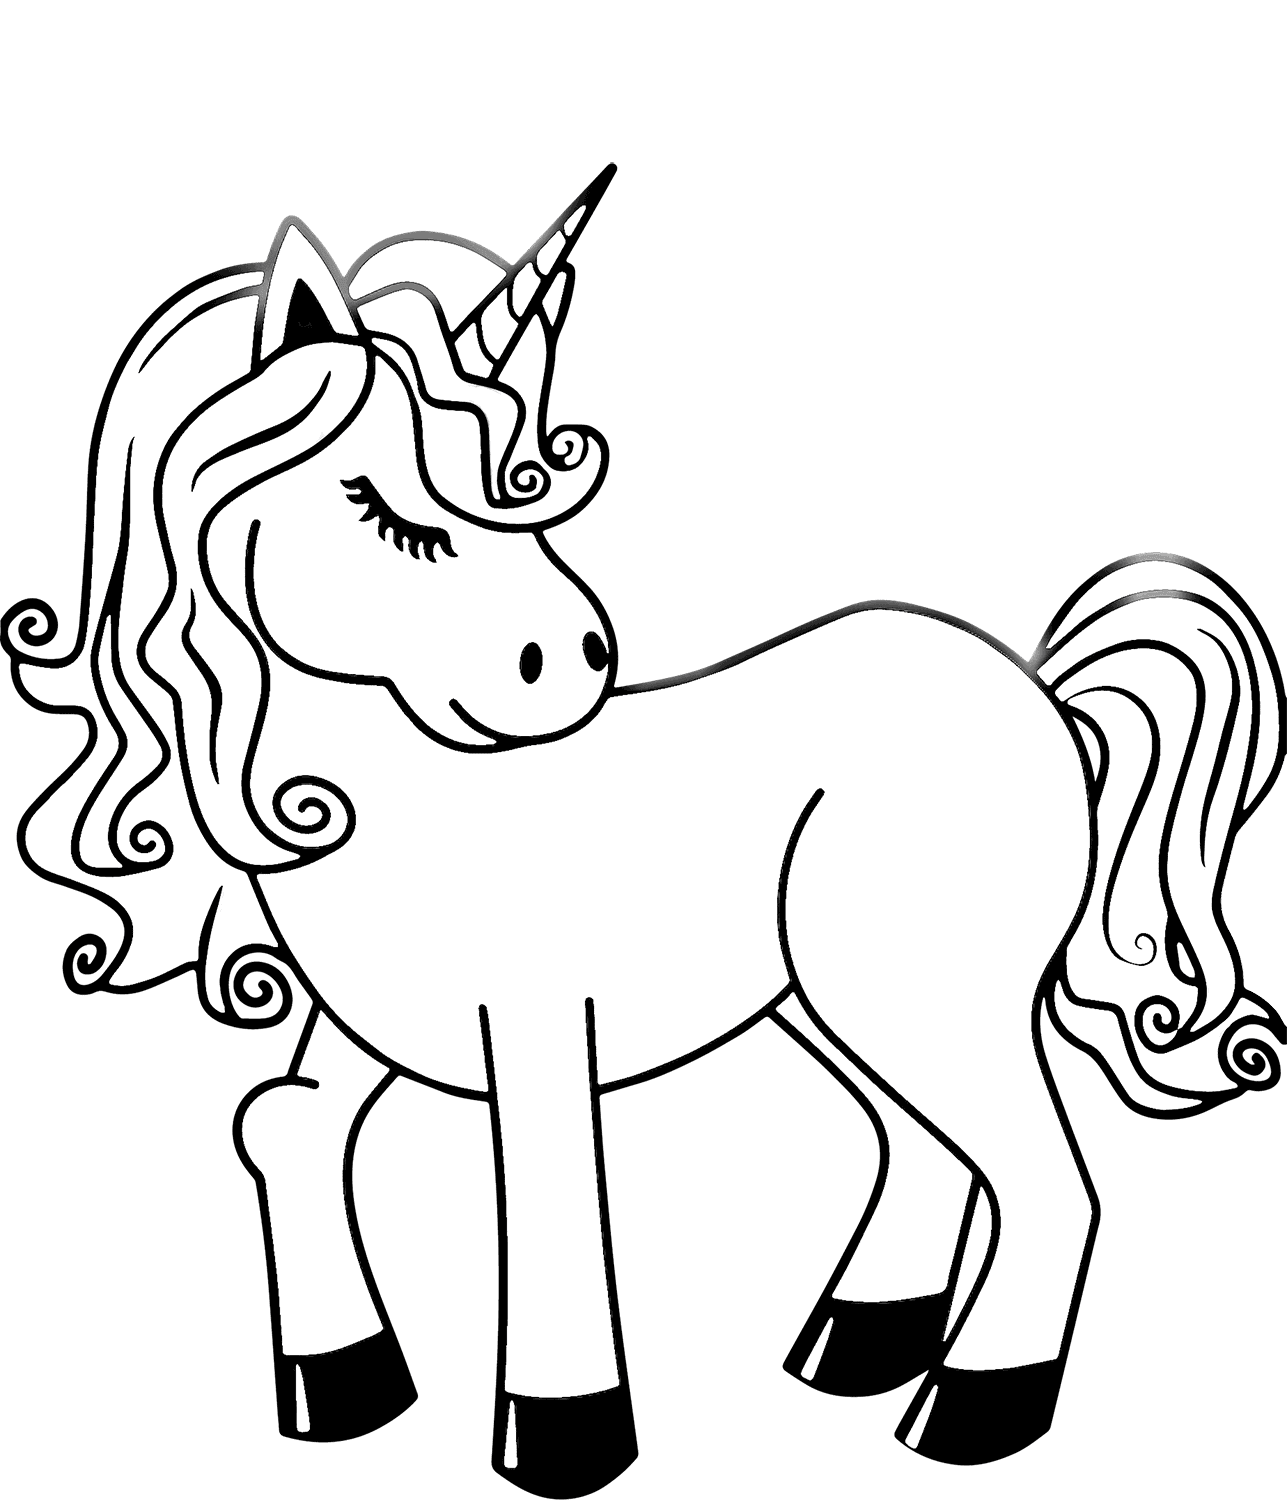 Charming Unicorn Coloring Page